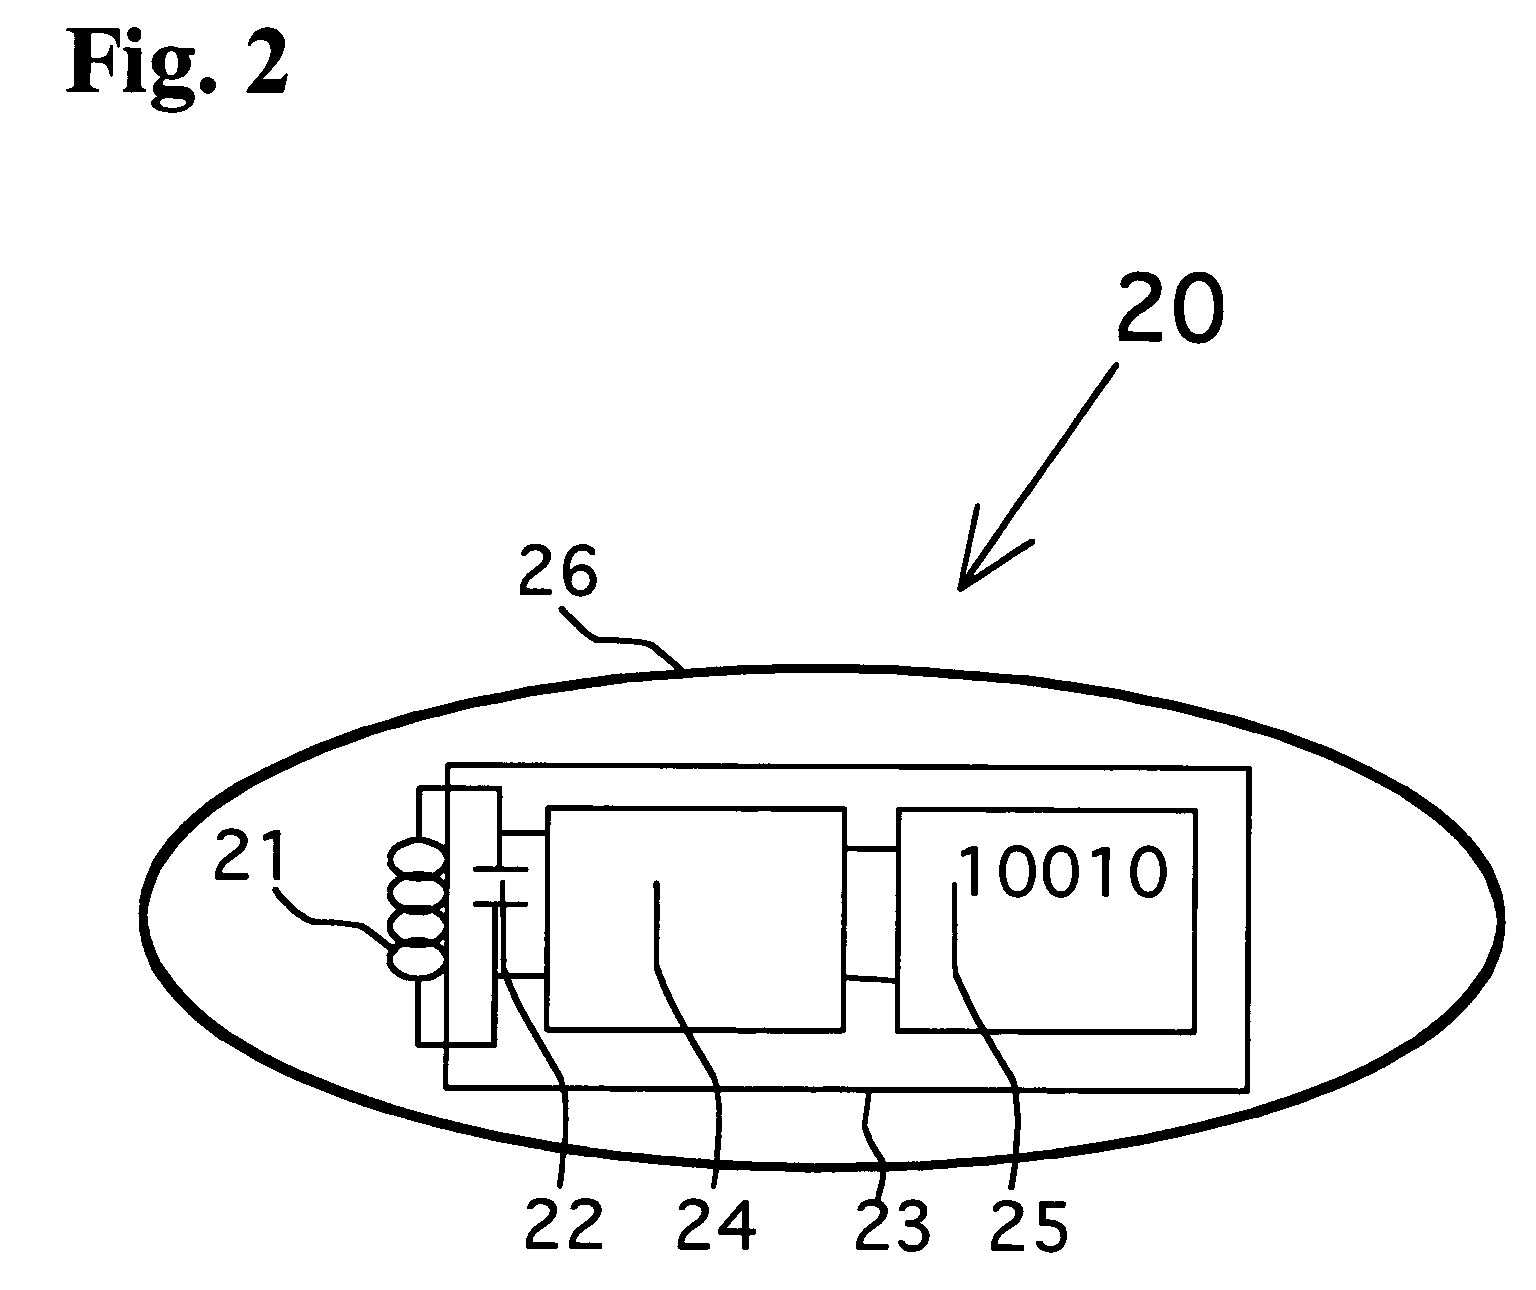 Surgical implement detector utilizing a radio-frequency identification marker